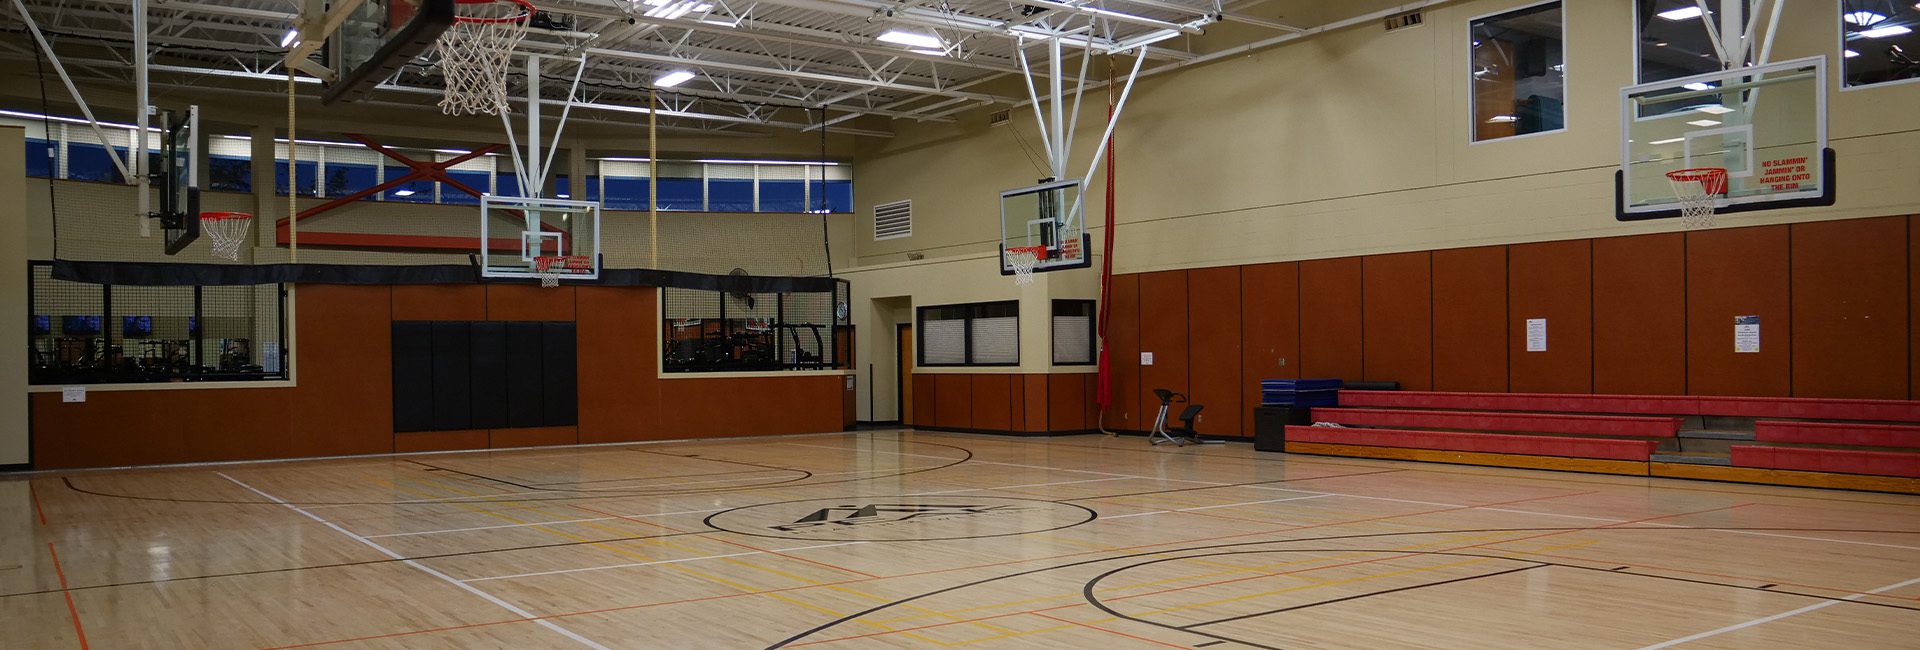 basketball court in a gym in missoula